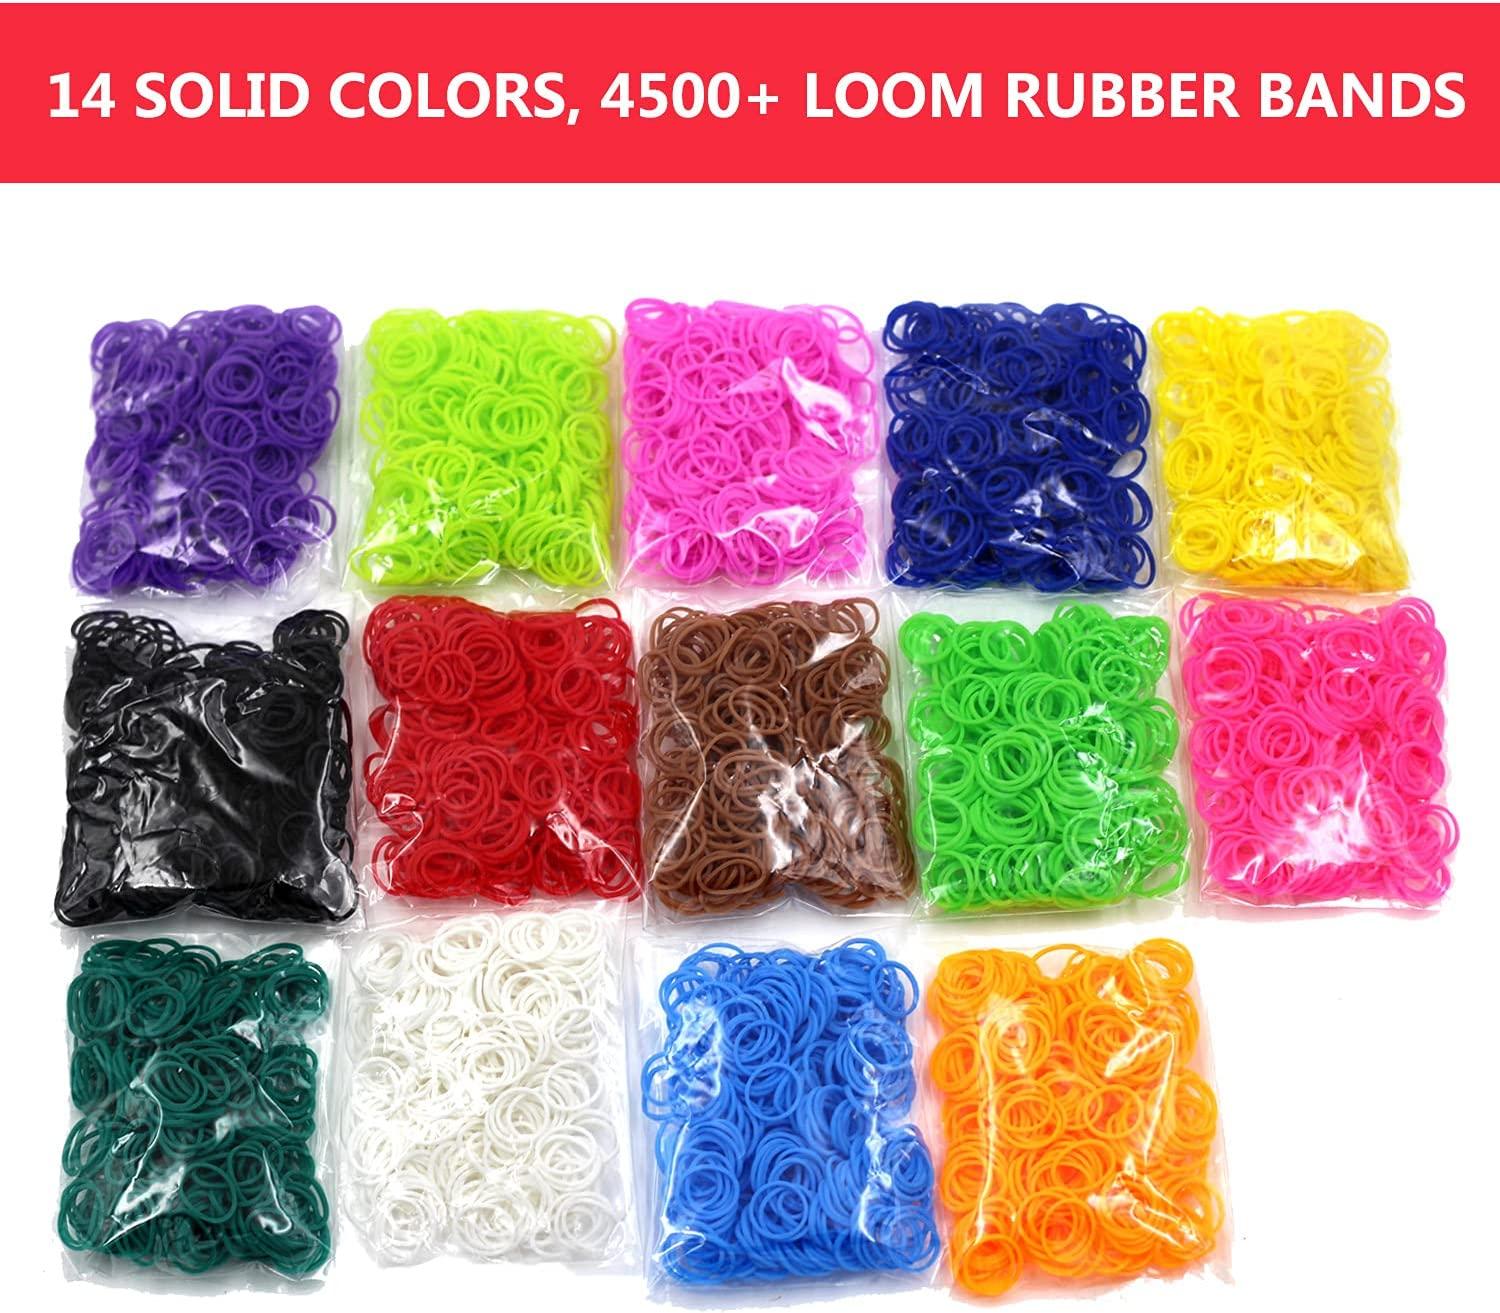 4860+ Loom Rubber Bands Refill Set: 14 Solid Colors 4500 Loom Bands+300  S-Clips+55 Pony Beads, Loom Bracelet Making Kit for Weaving Craft, Boy&Girl